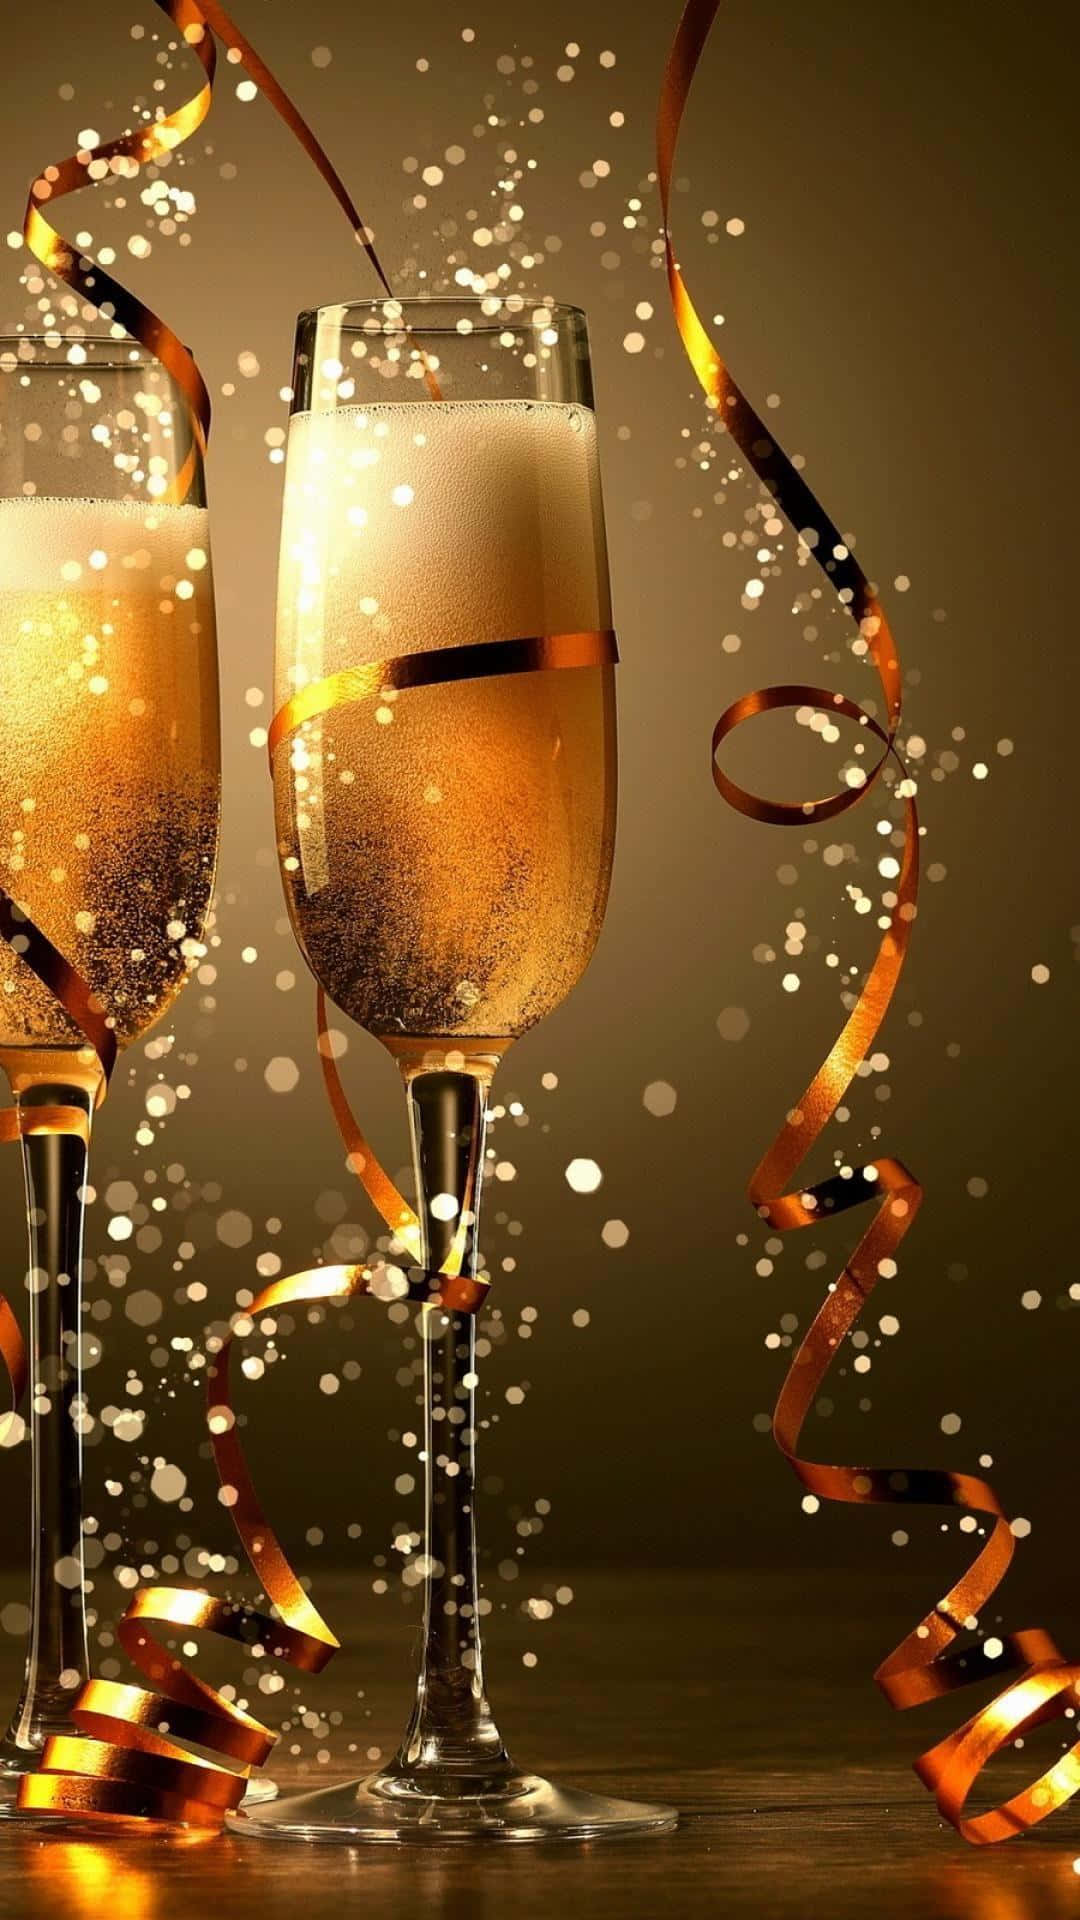 New Year Iphone Gold Wine And Ribbons Wallpaper